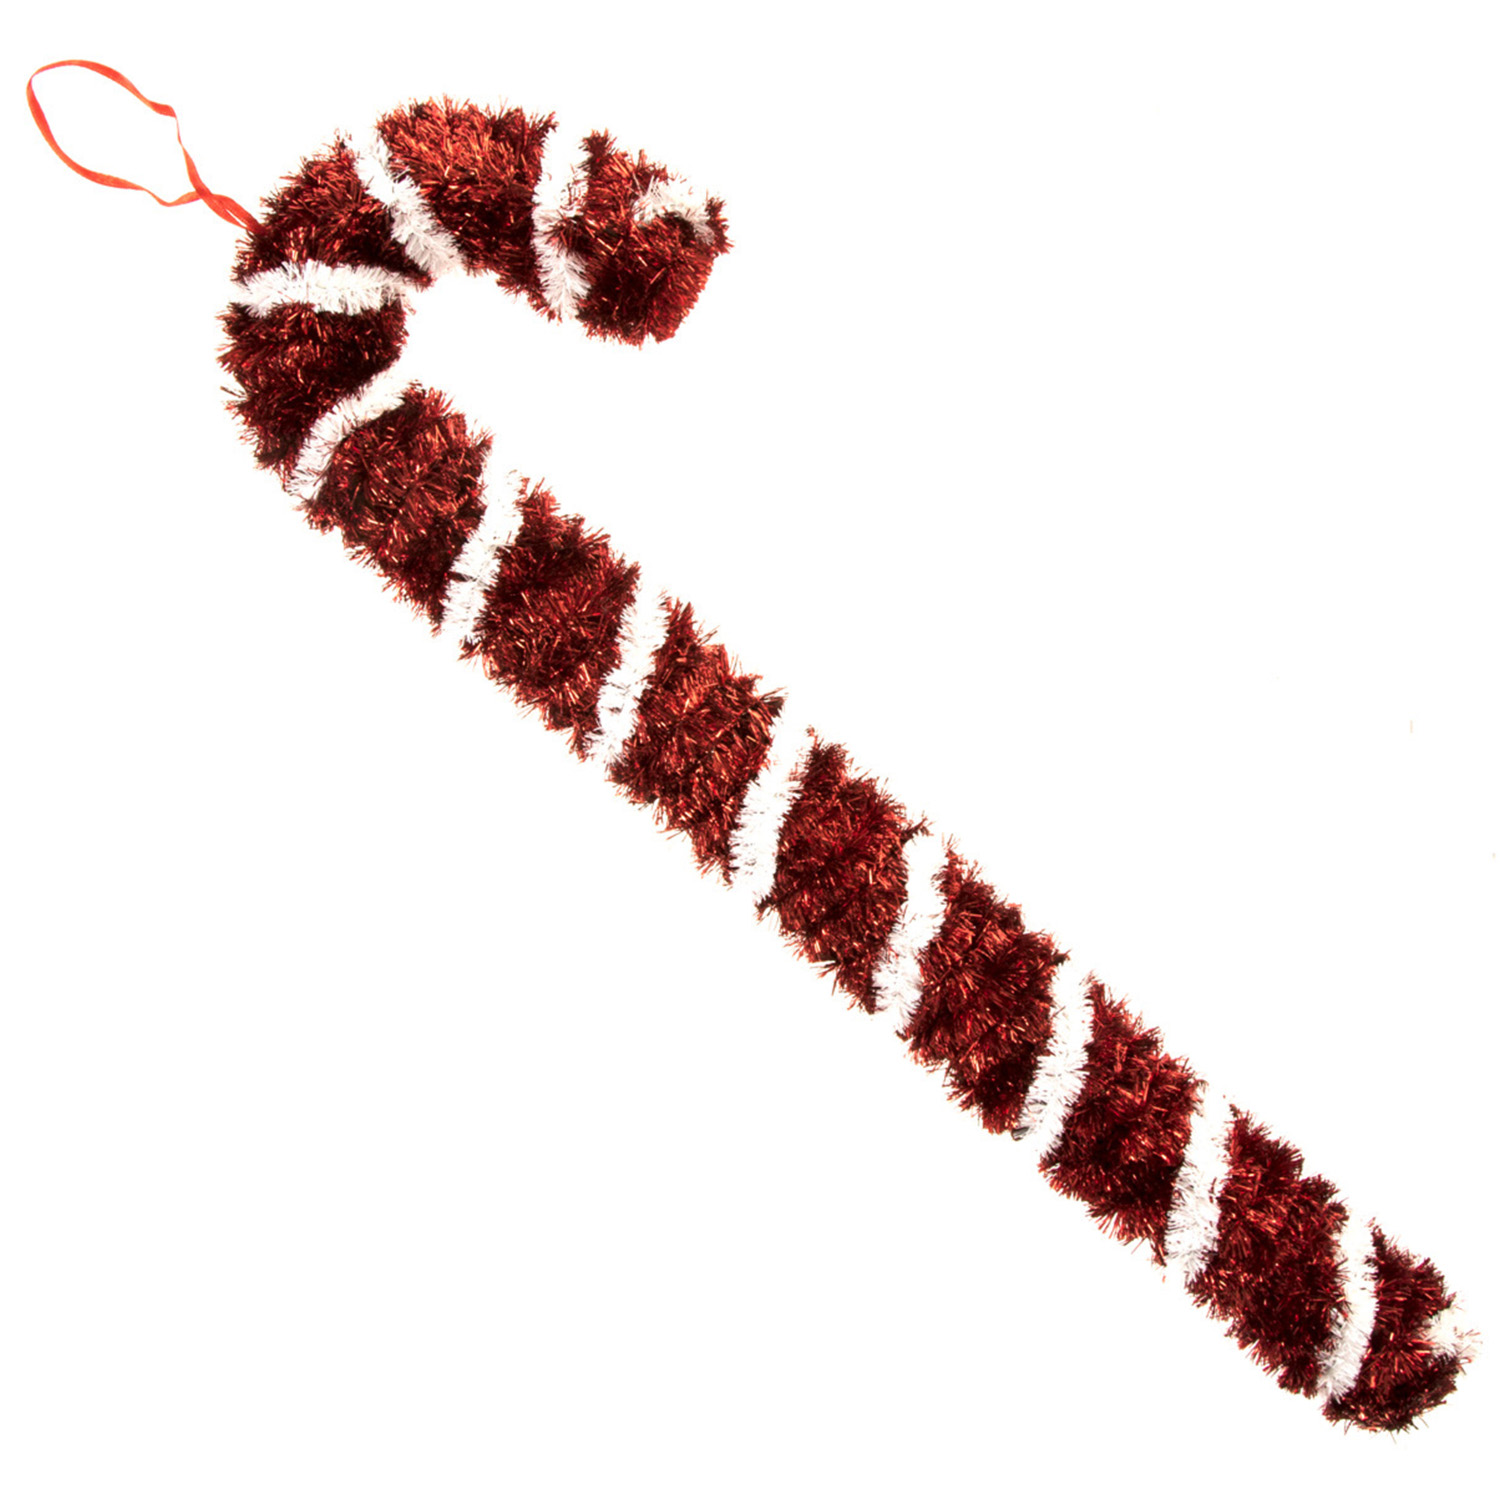 Red and White Candy Stick Christmas Tinsel Decoration Image